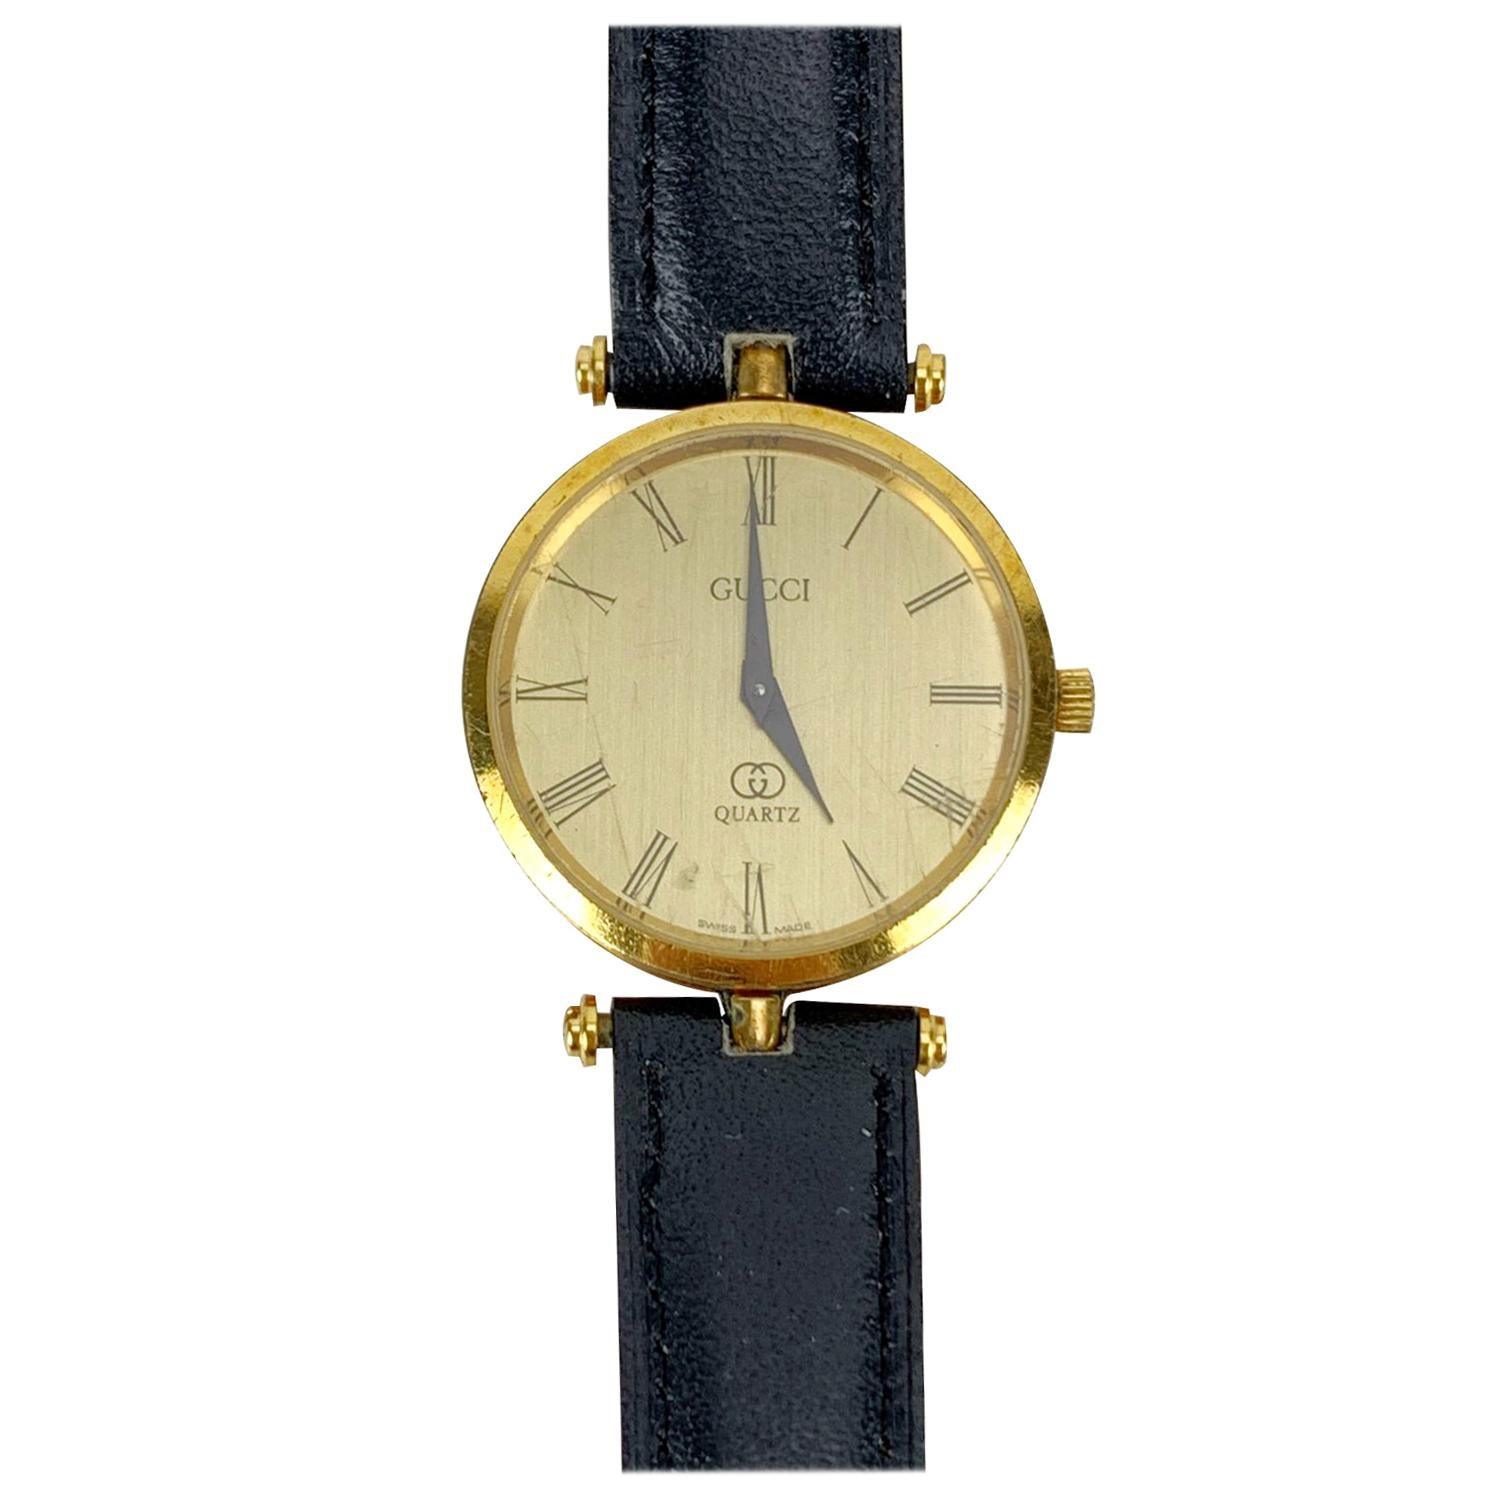 Gucci Vintage Gold Tone Stainless Steel Watch Leather Strap